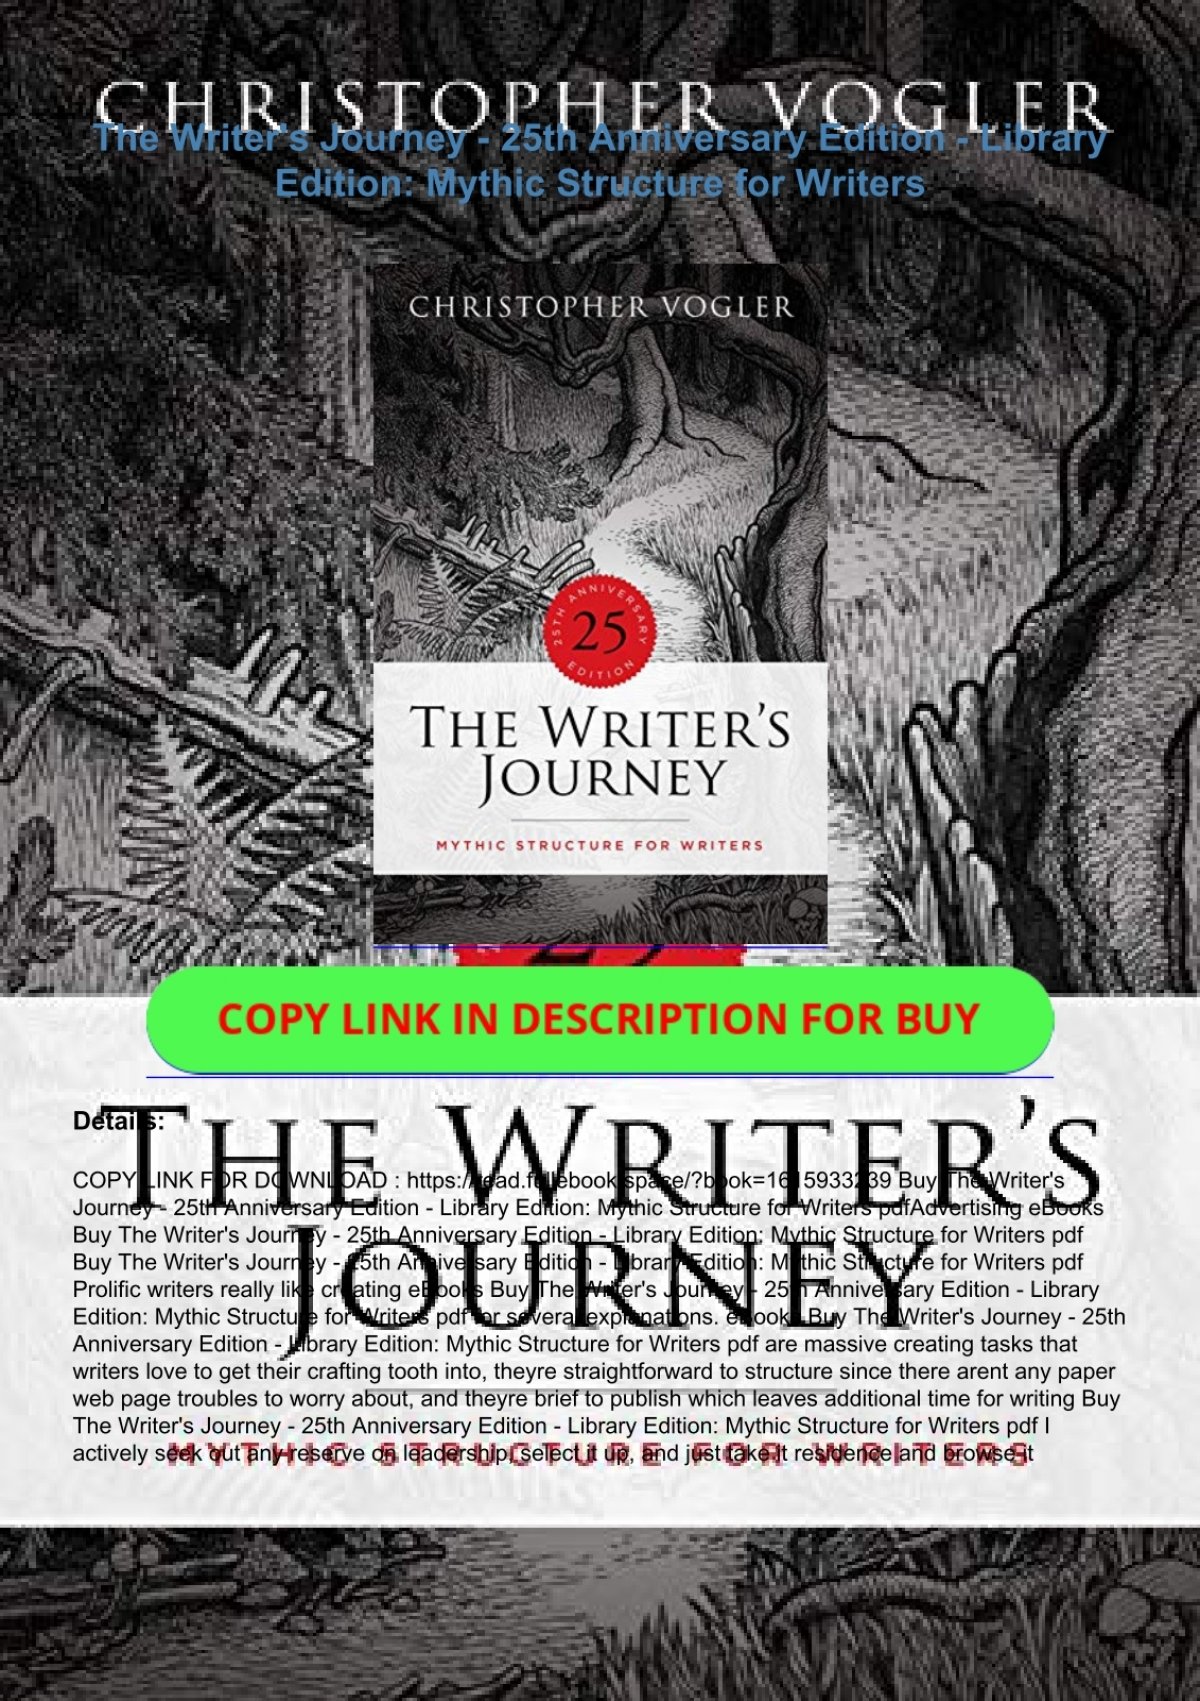 the writer's journey 3rd edition